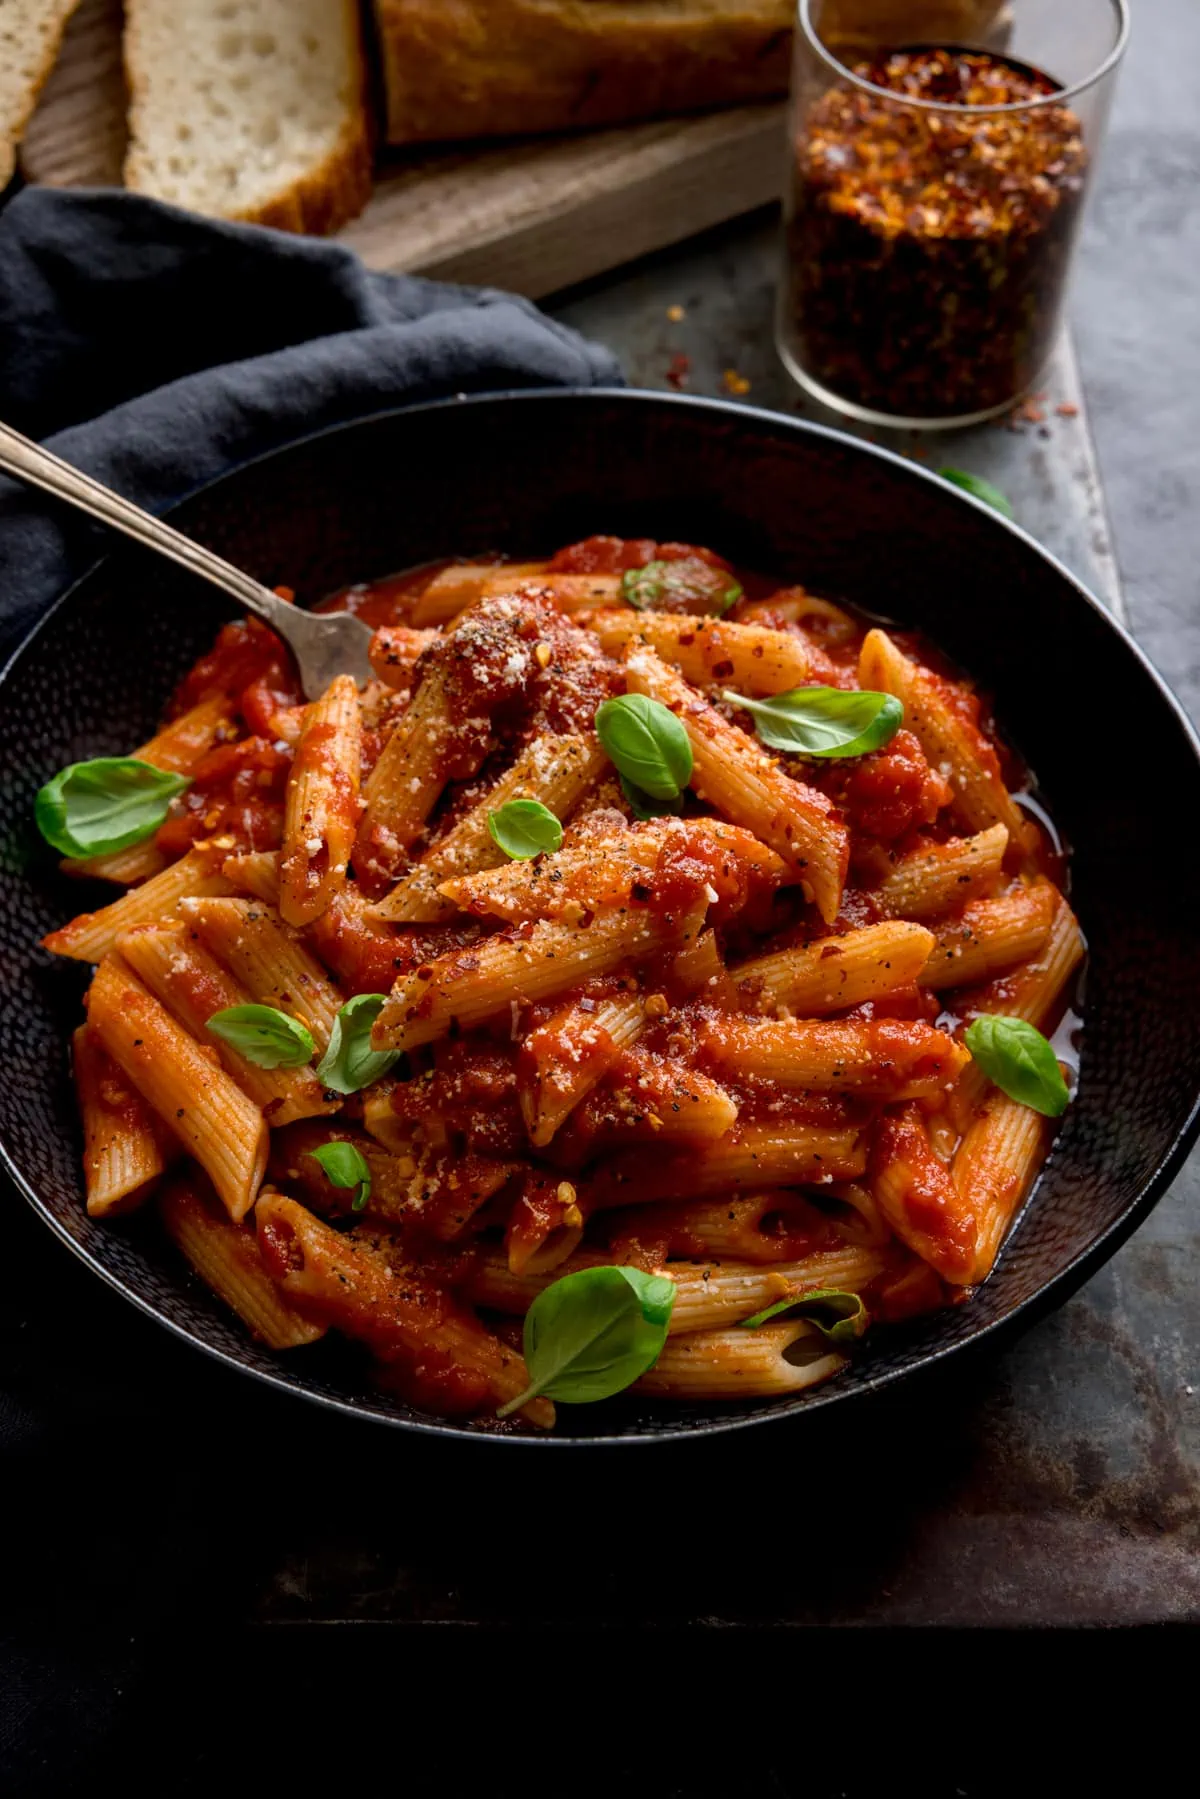 A black bowl filled with penne arrabiata, with fresh baby basil leaves sprinkled on top. There is a fork sticking out of the bowl. The bowl is in a dark surface and there is a loaf of bread with a couple of sliced pieces and a jar of chilli flakes at the top of the frame.